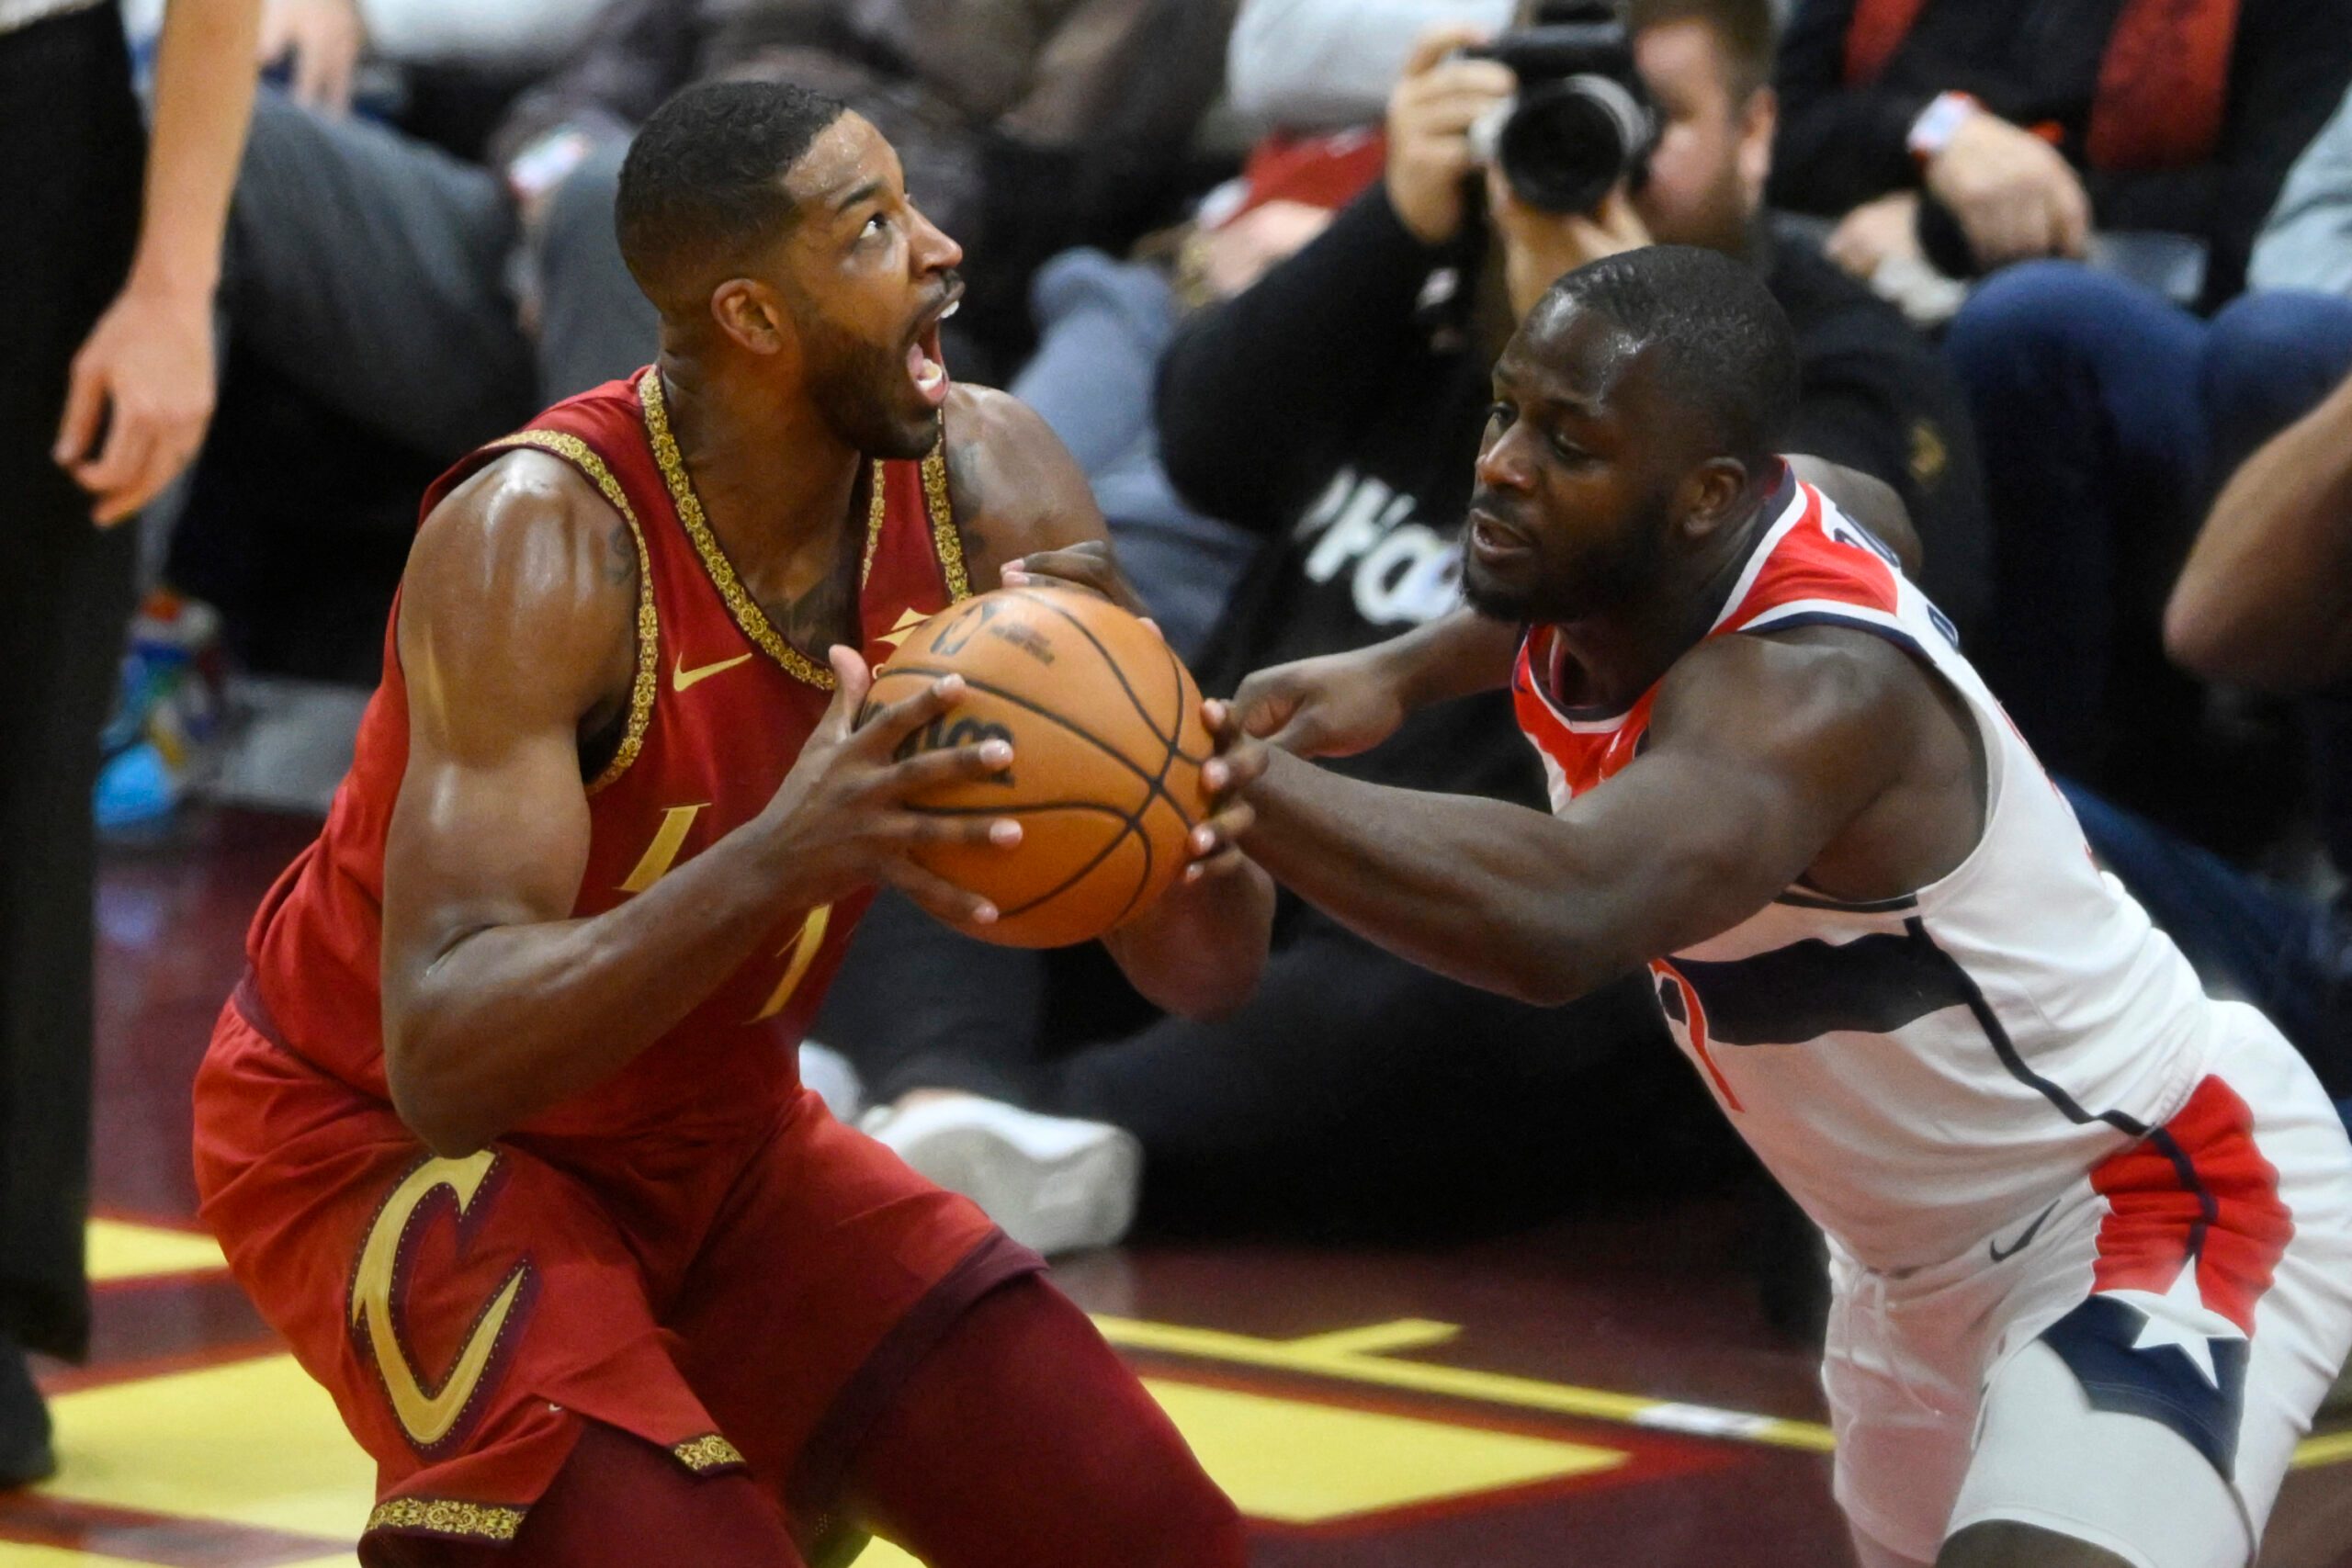 Cavaliers cruise to 39-point rout of Wizards